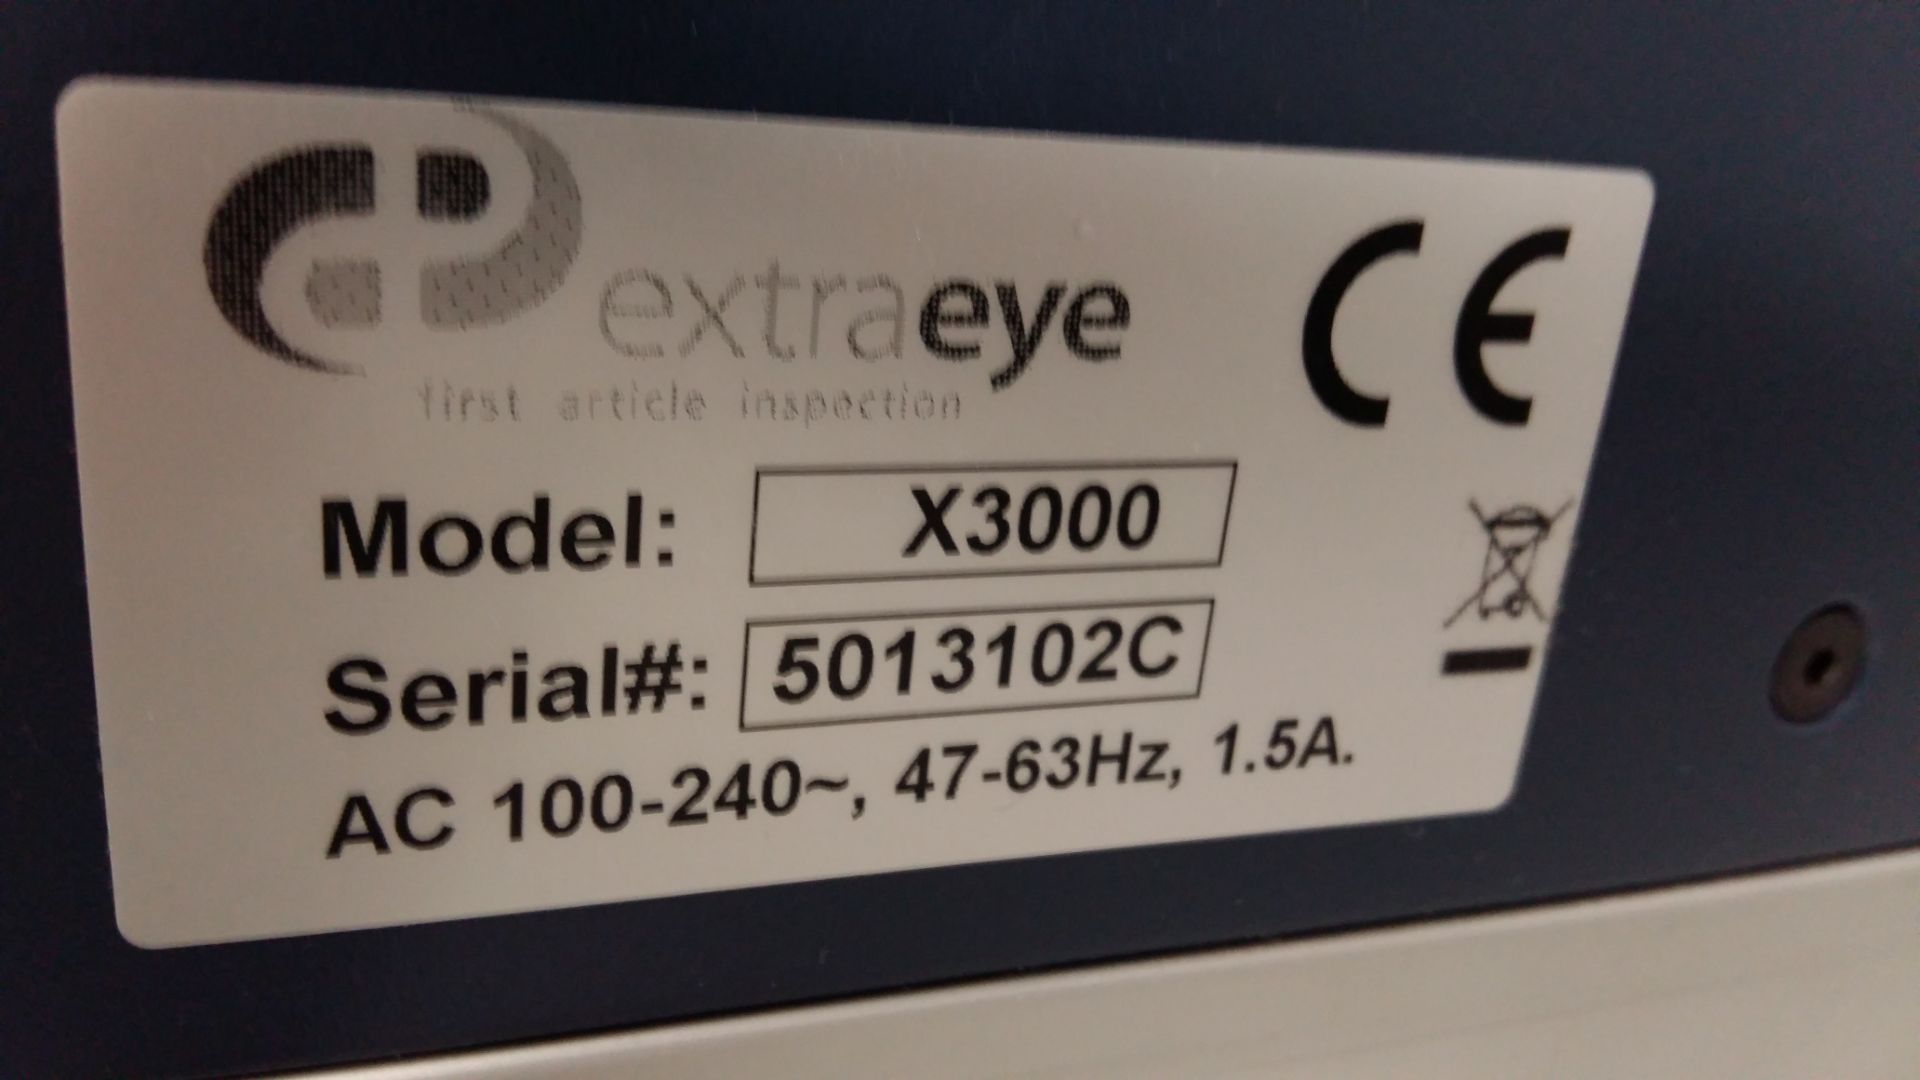 Blundell Extra Eye X3000 bench mounted optical inspection machine - Image 4 of 6